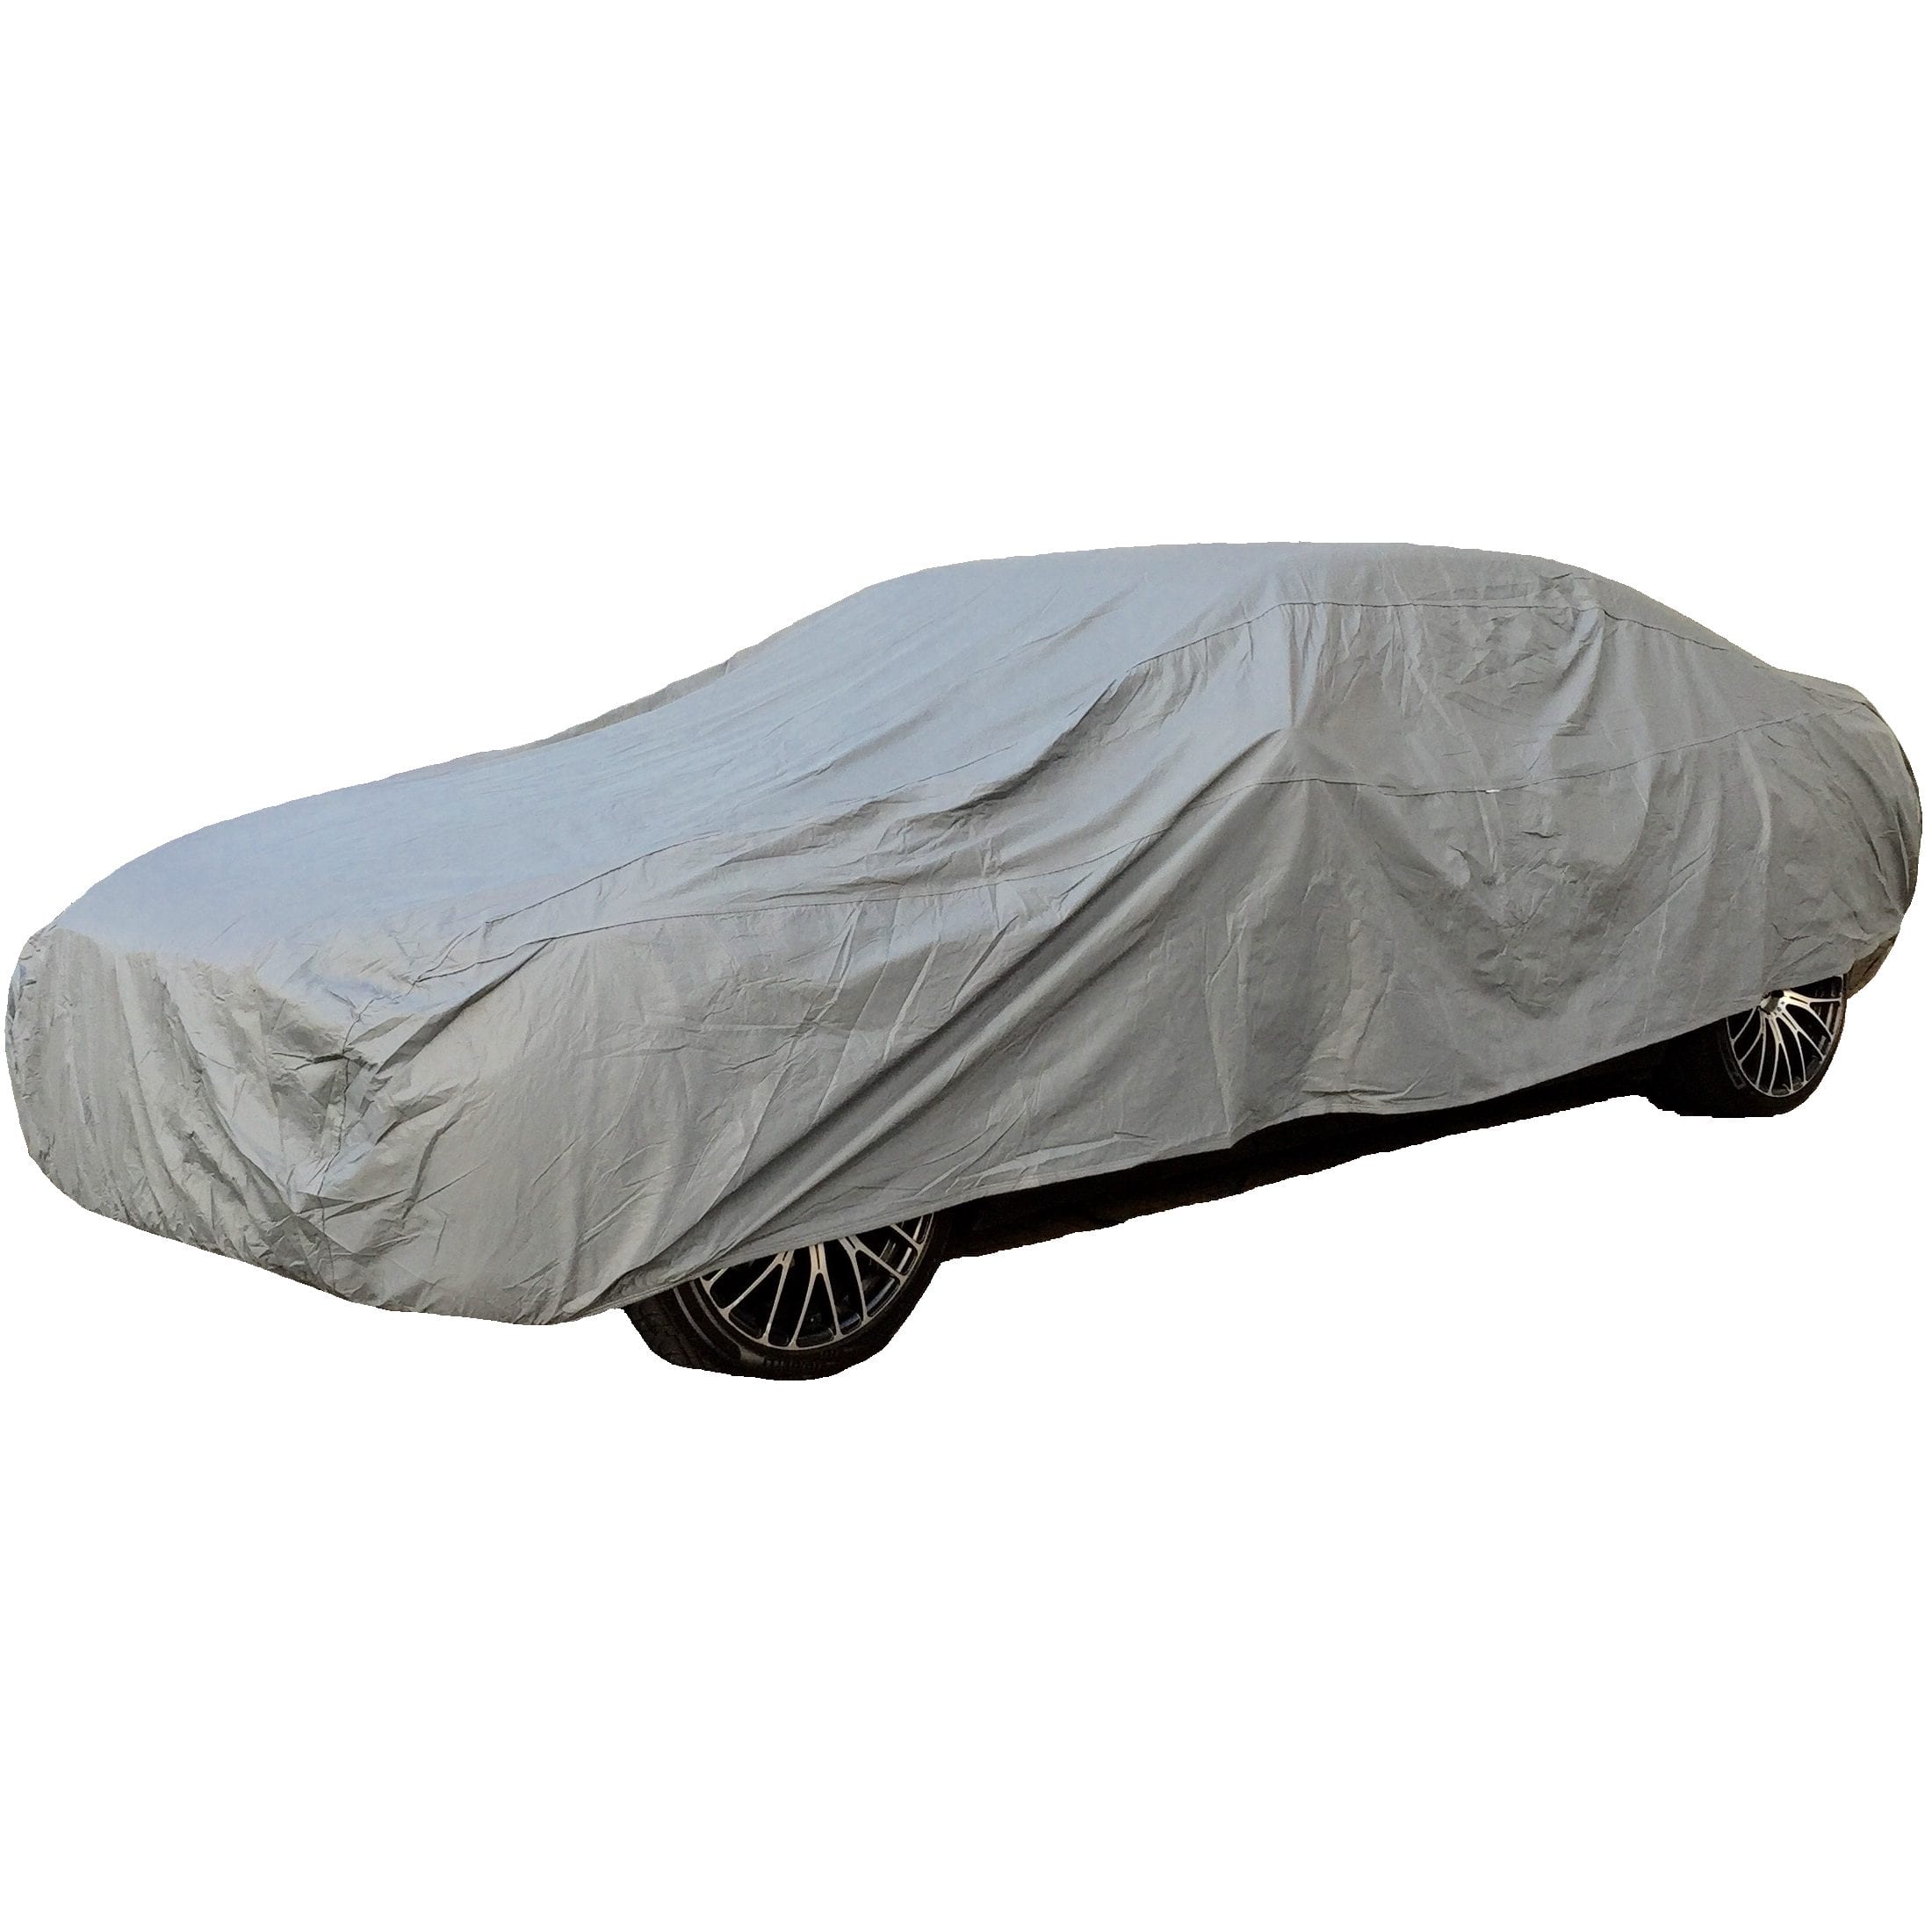 Heavy-Duty Fleece Lined Car Cover for cars from 214 to 228 or 19 in Length 5 Layer 